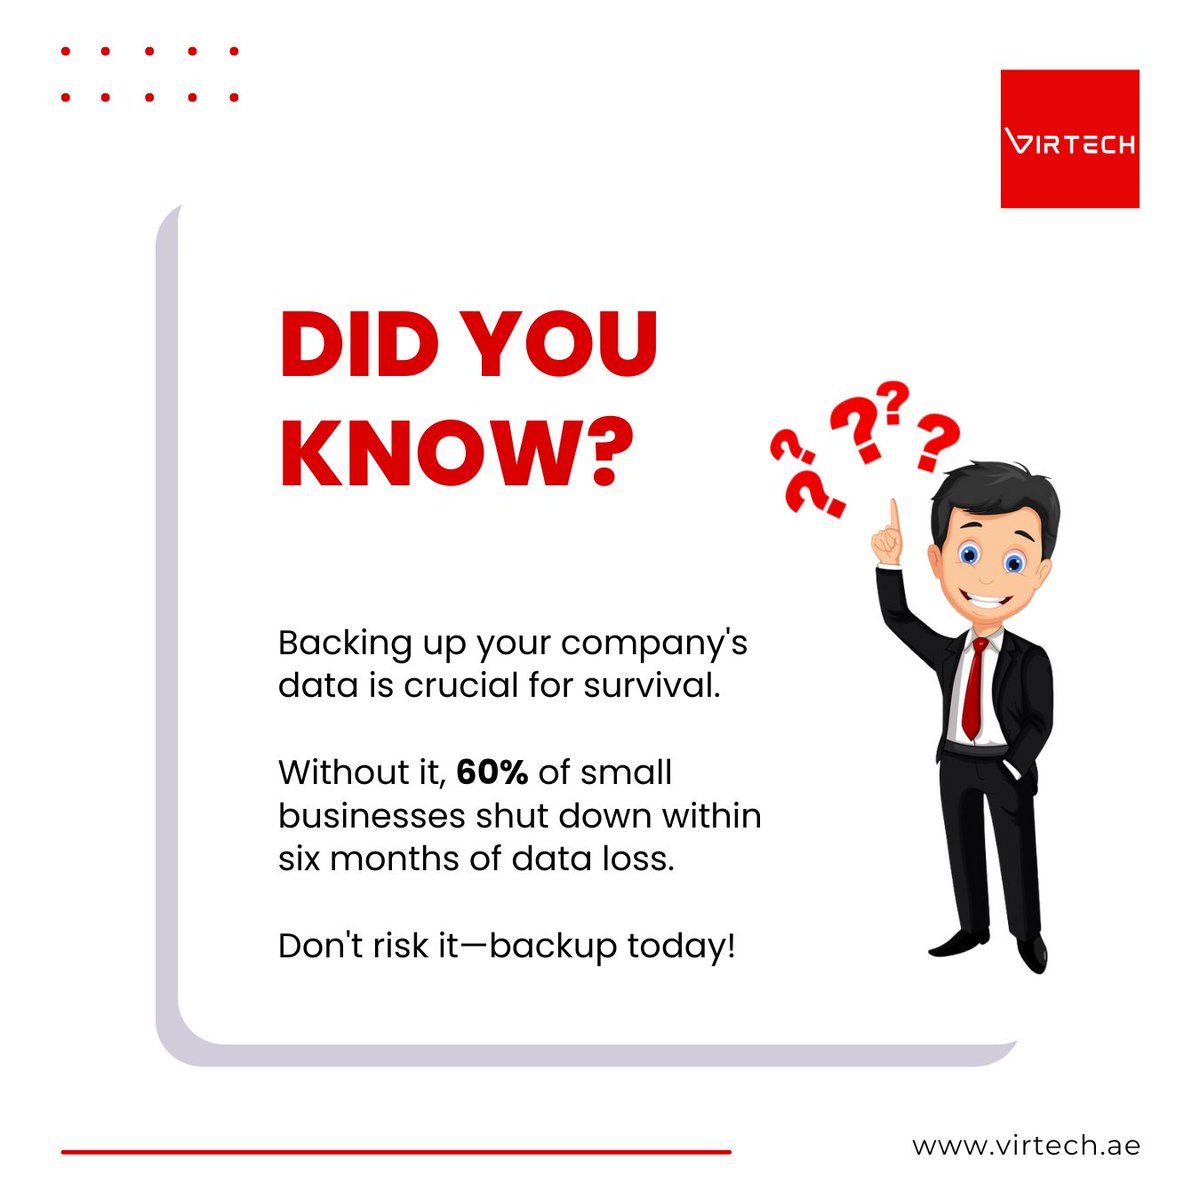 Unlocking Business Continuity: Secure Your Data to Ensure Your Company's Future!

#DataBackup #BusinessSurvival #TechTip #VirtechUAE